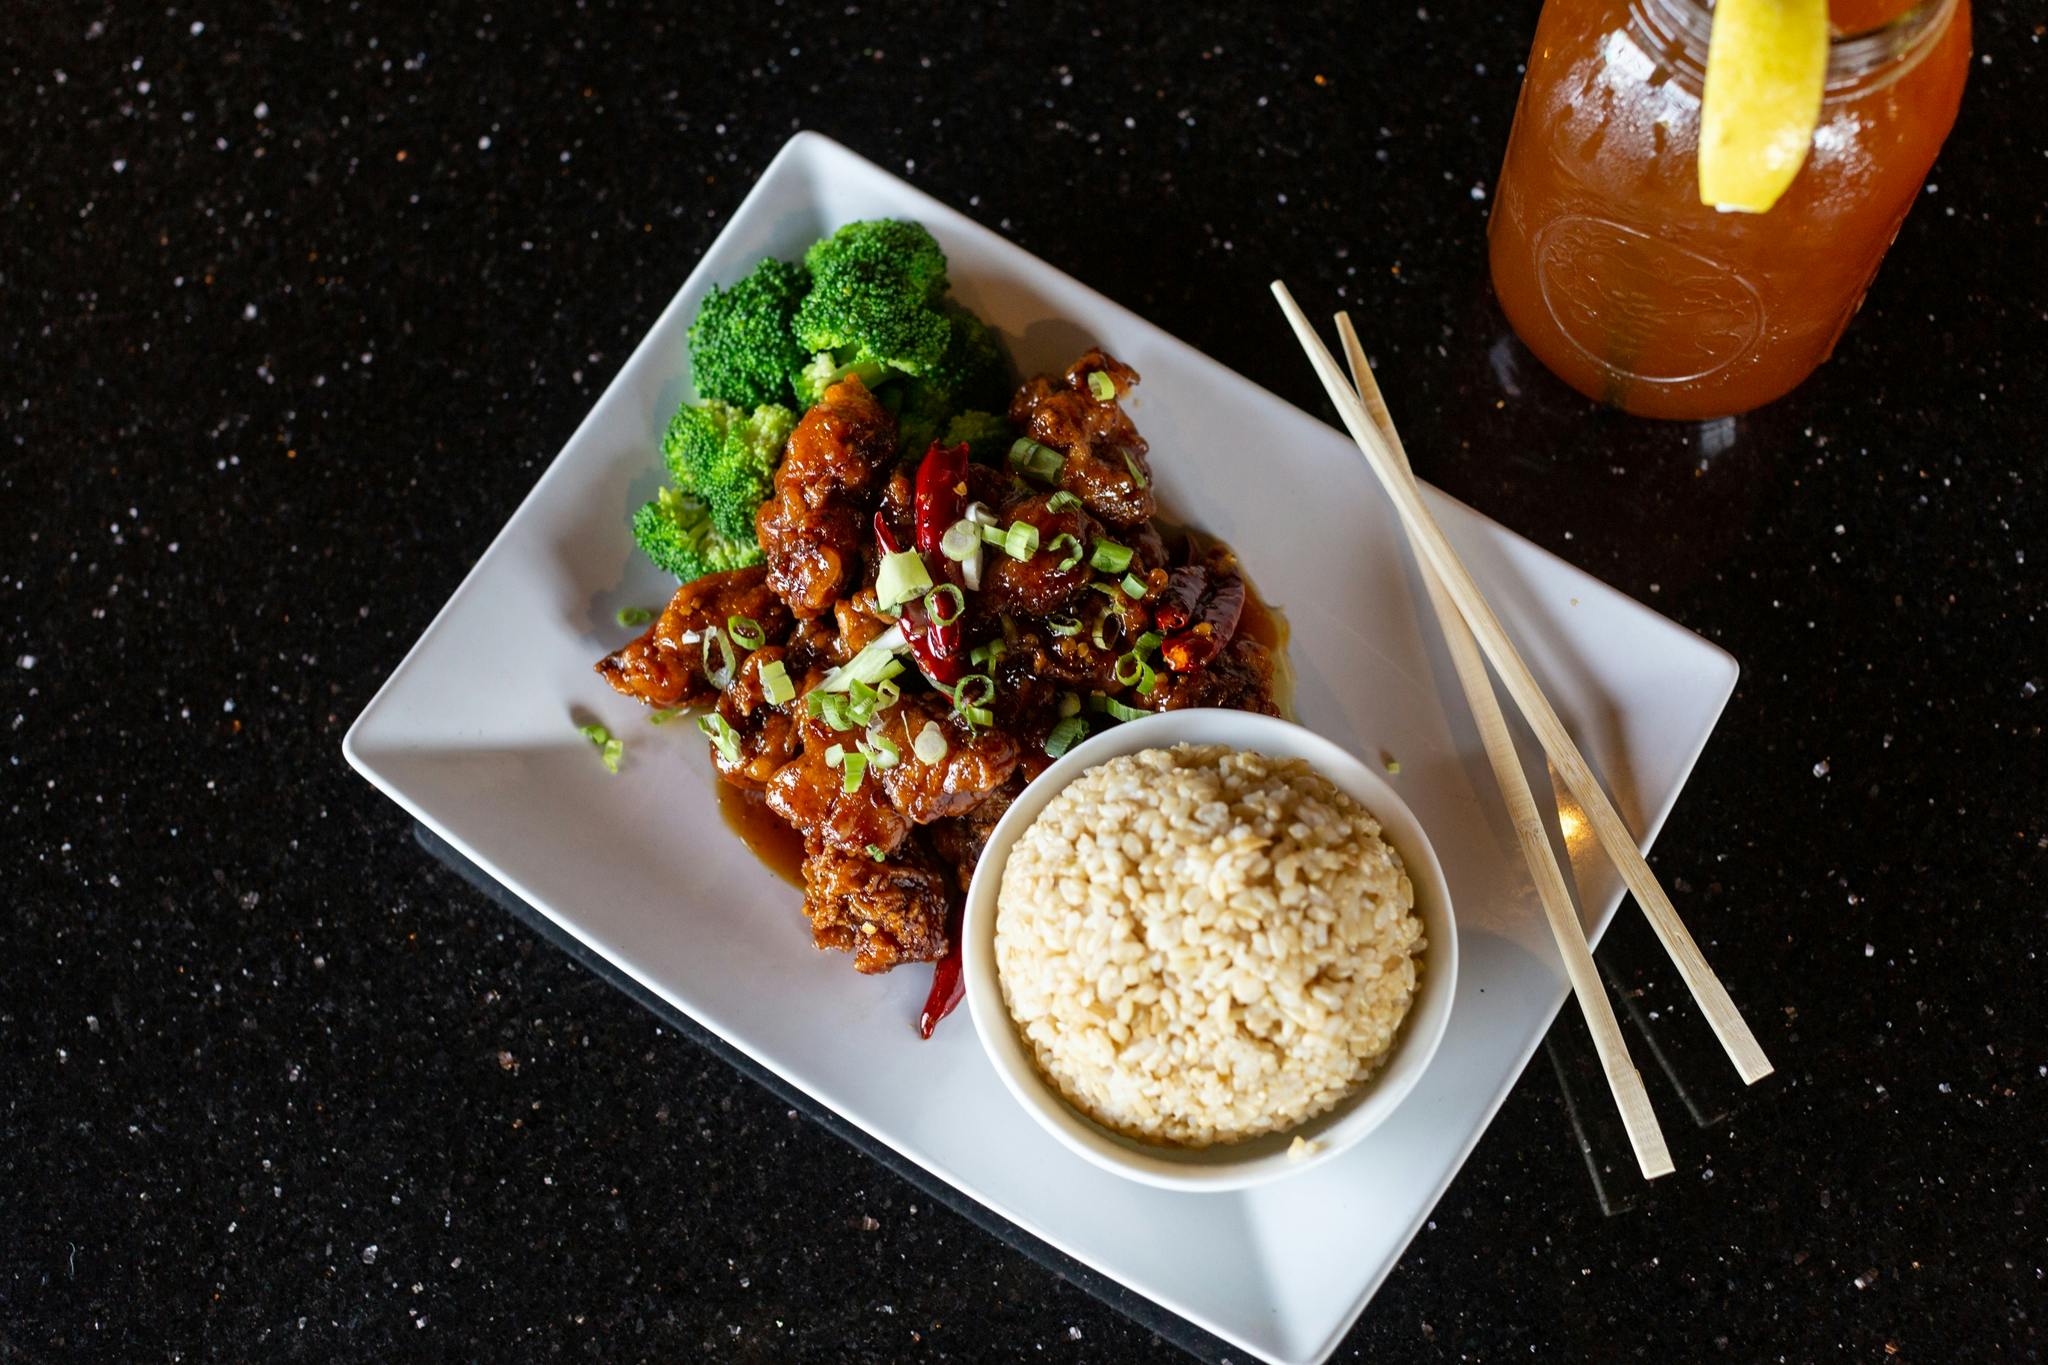 General Tso's Chicken from Oriental Bistro & Grill in Lawrence, KS